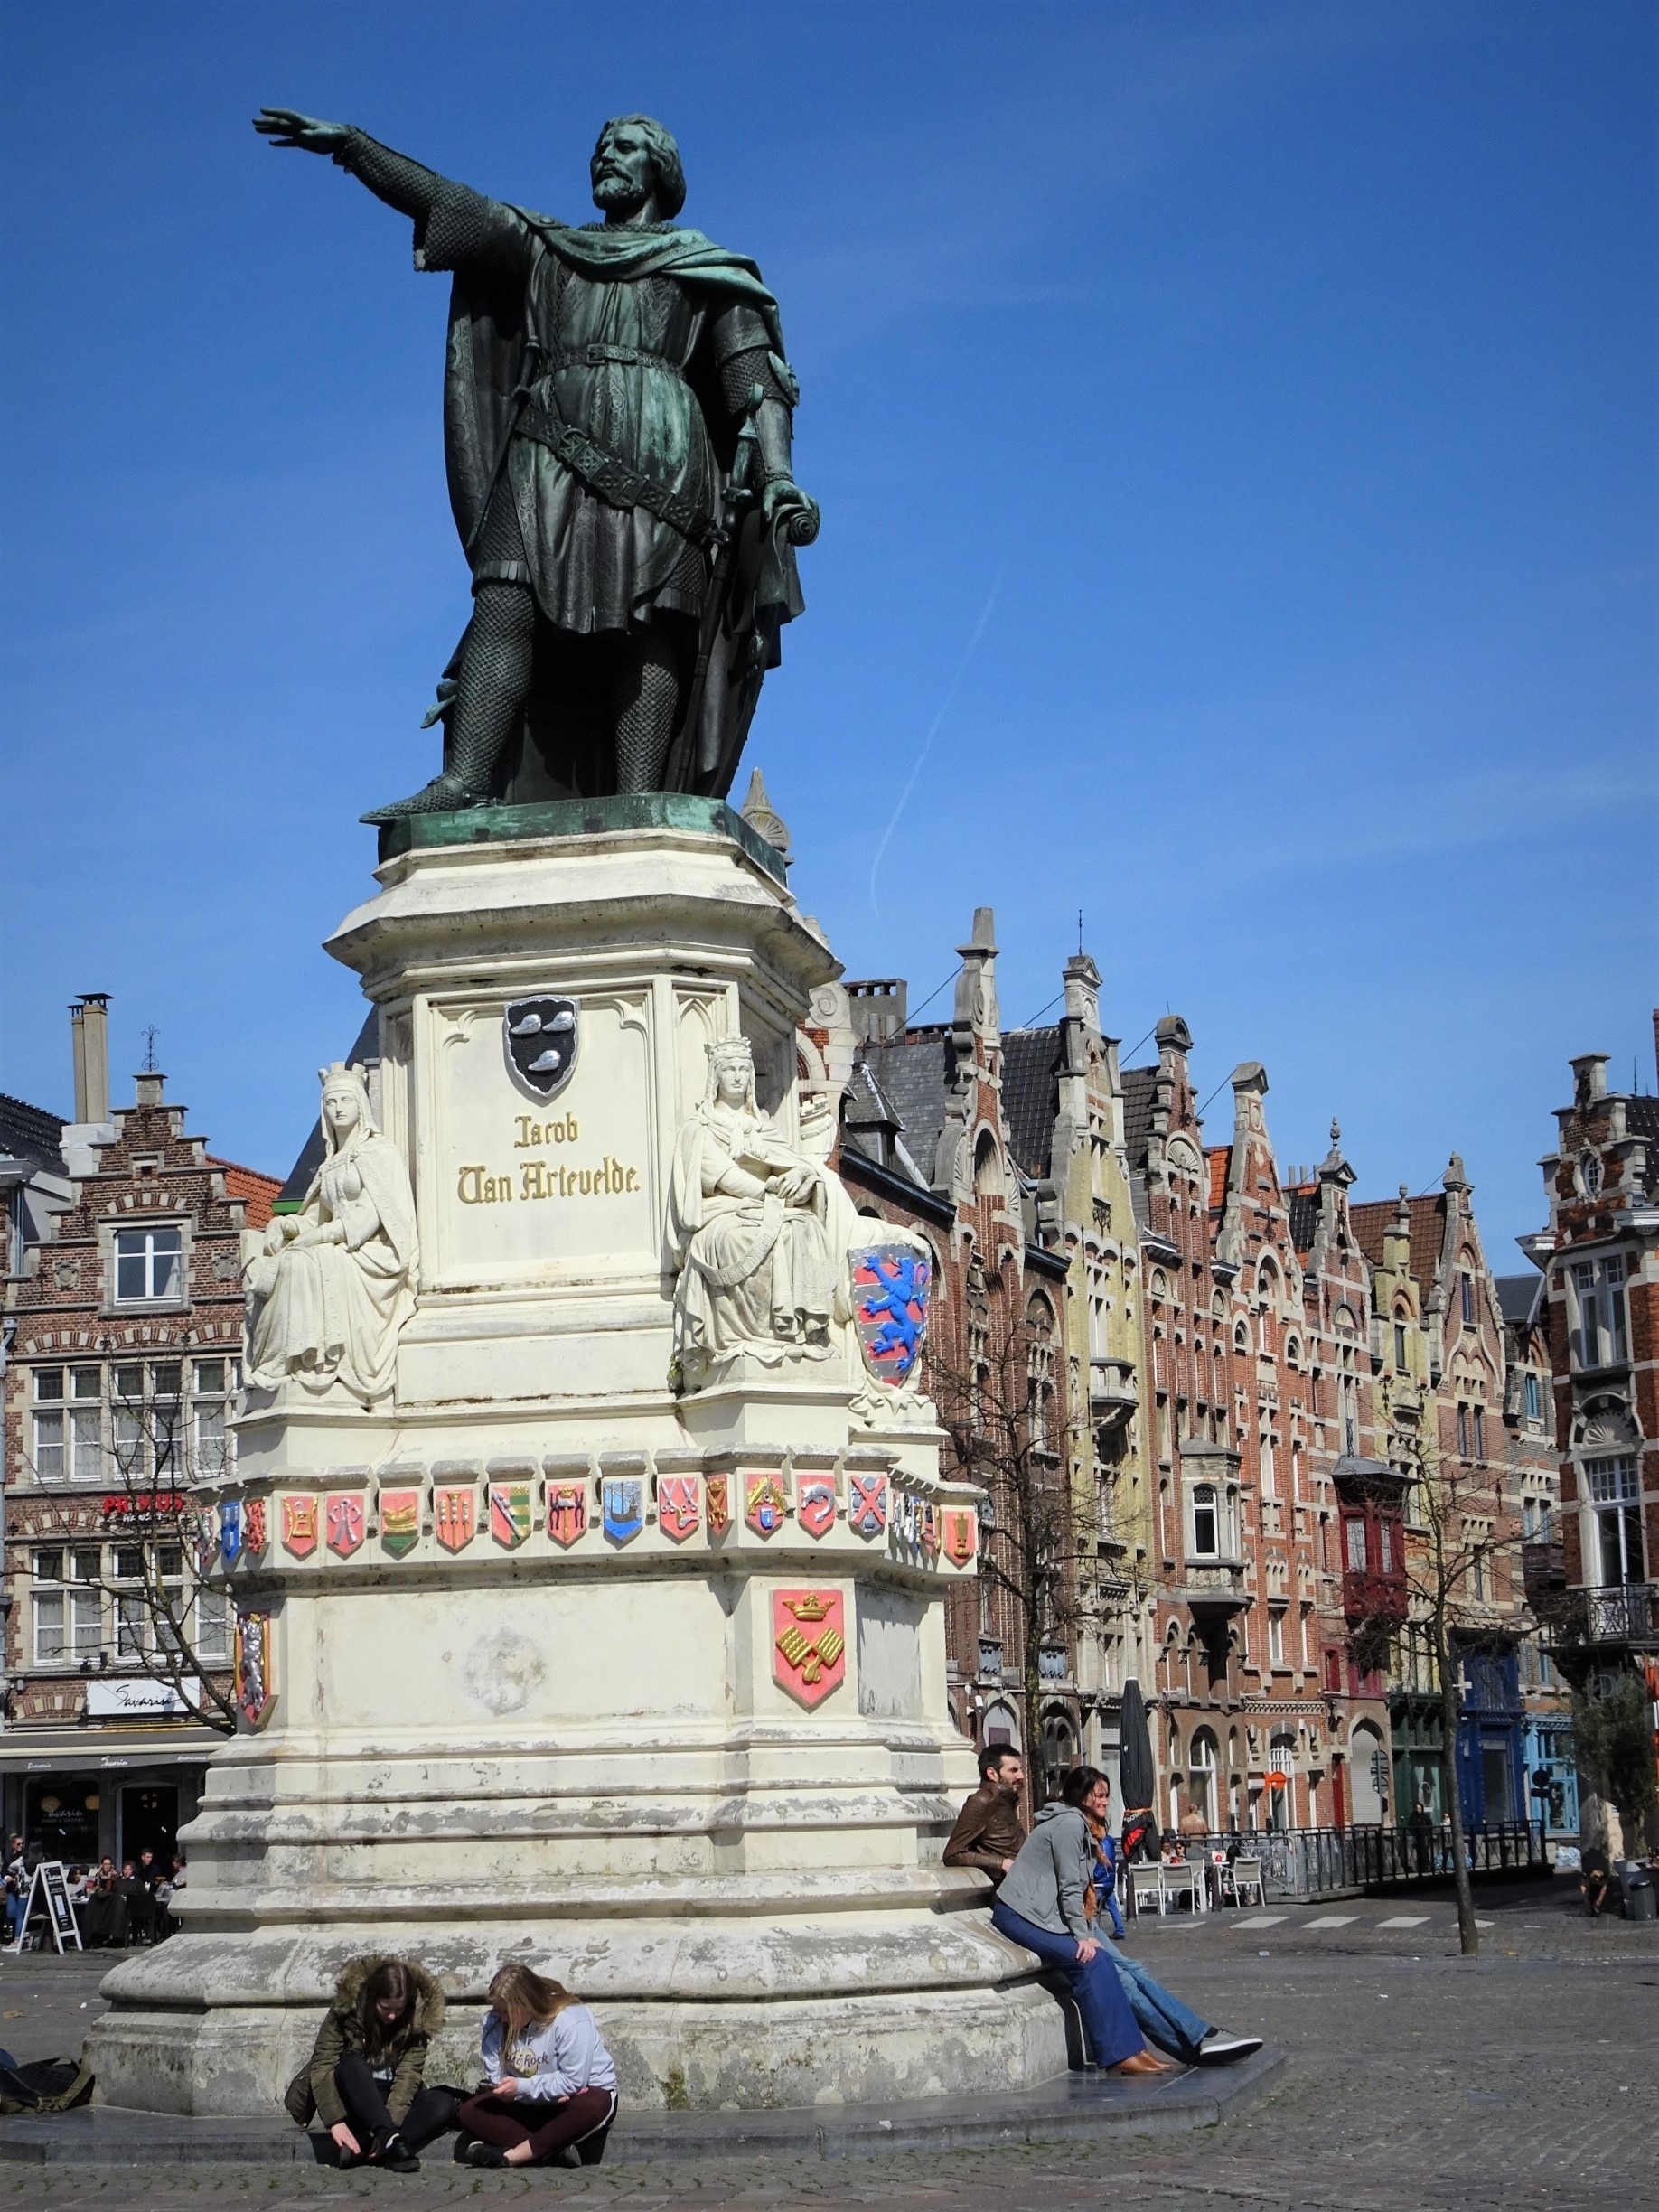 “Vrijdagsmarkt” or Friday Market Square with the statue of Jacob van Artevelde.
The Flemish leader Jacob van Artevelde managed to undo the boycott of English wool imports during the Hundred Years’ War between England and France in the 14th century. The textiles industry in Ghent was revived and Artevelde was hailed a hero. In 1345 he was murdered during a riot. Since 1863 his statue has been pointing to England. #Ghent  #History